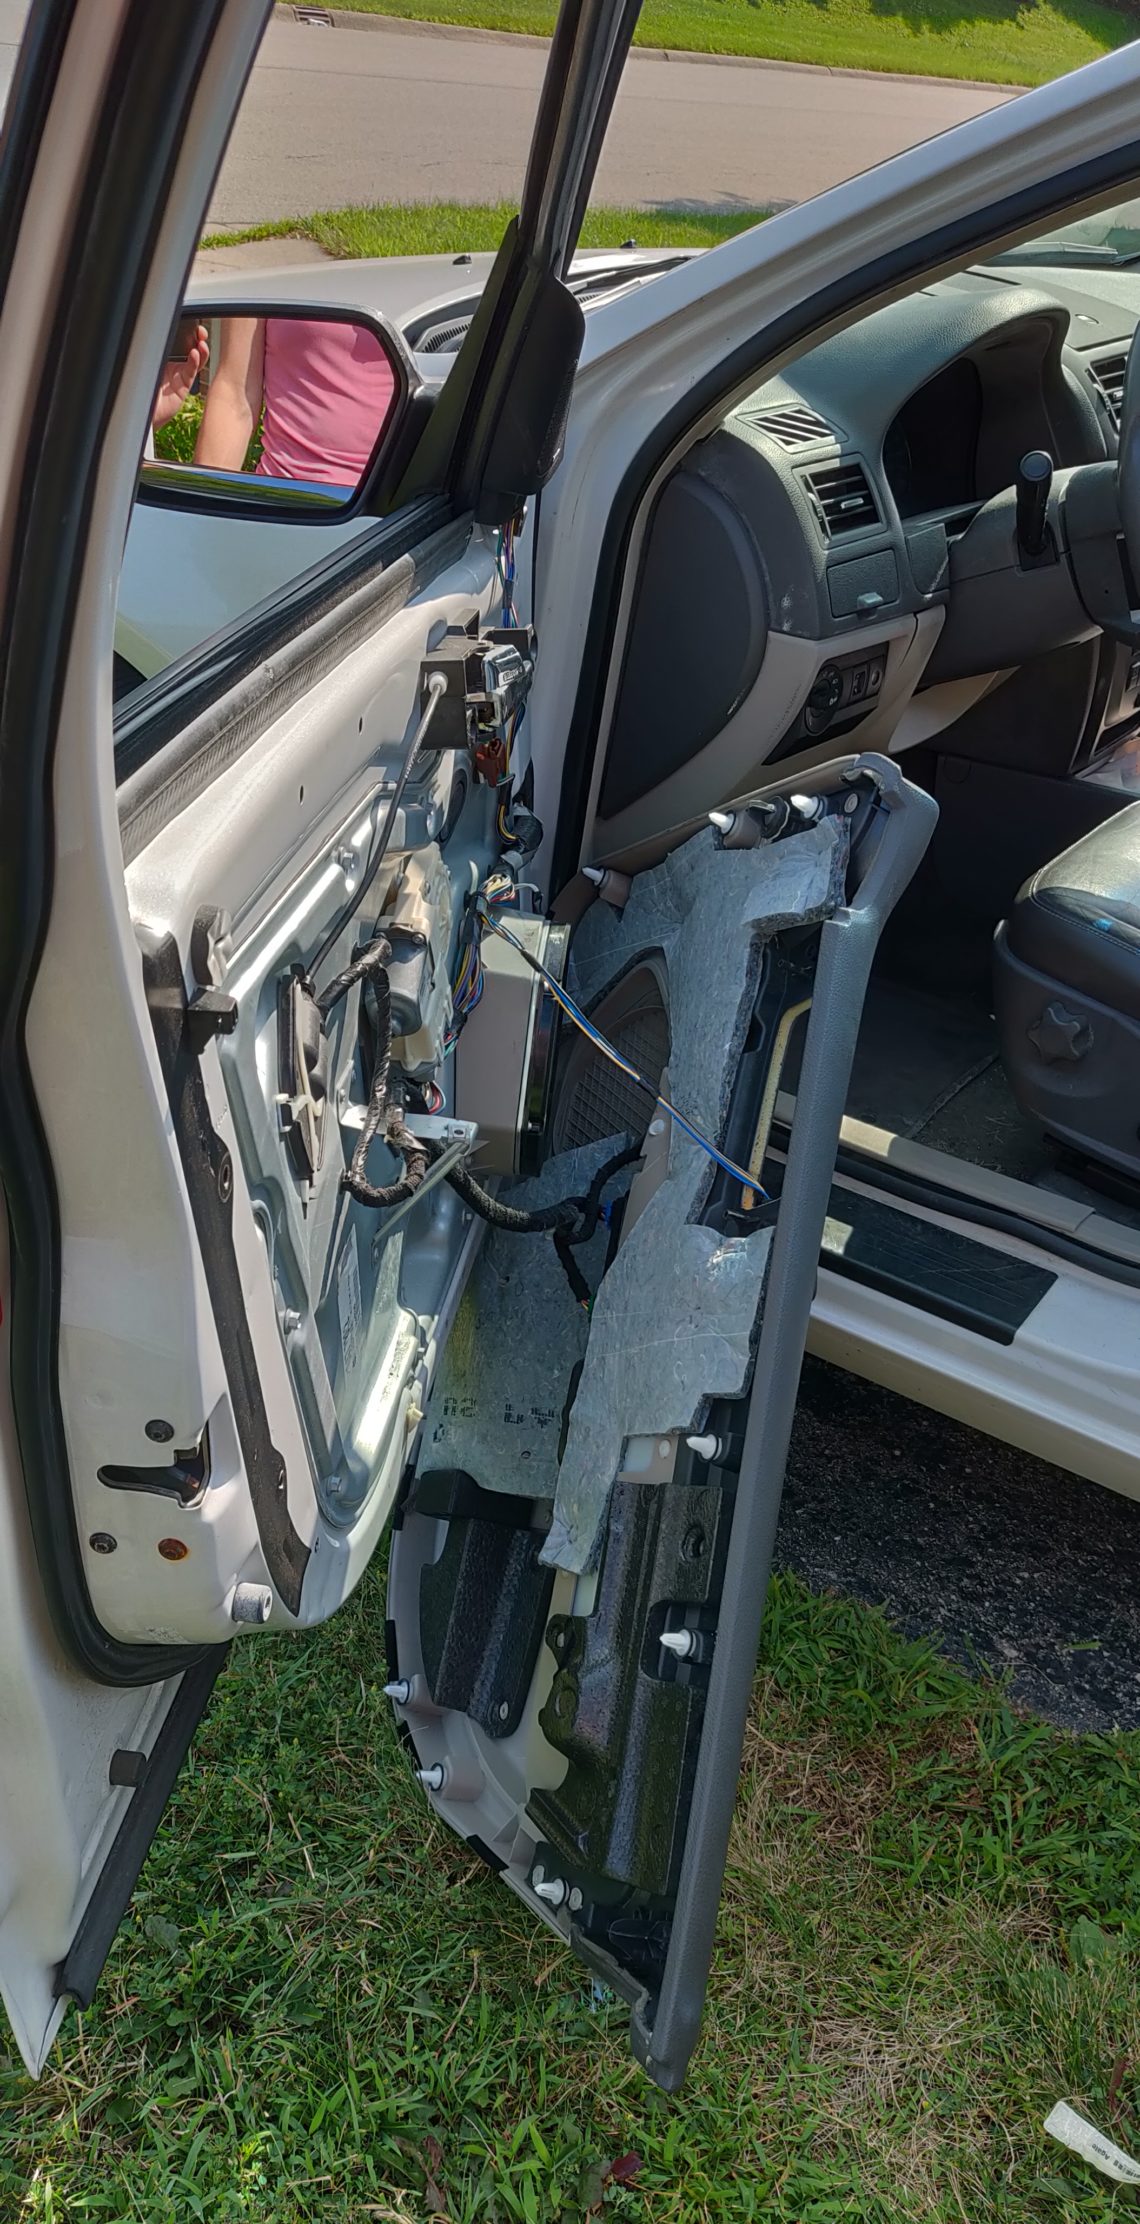 Inner trim panel of the door removed to allow access to the broken car handle assembly